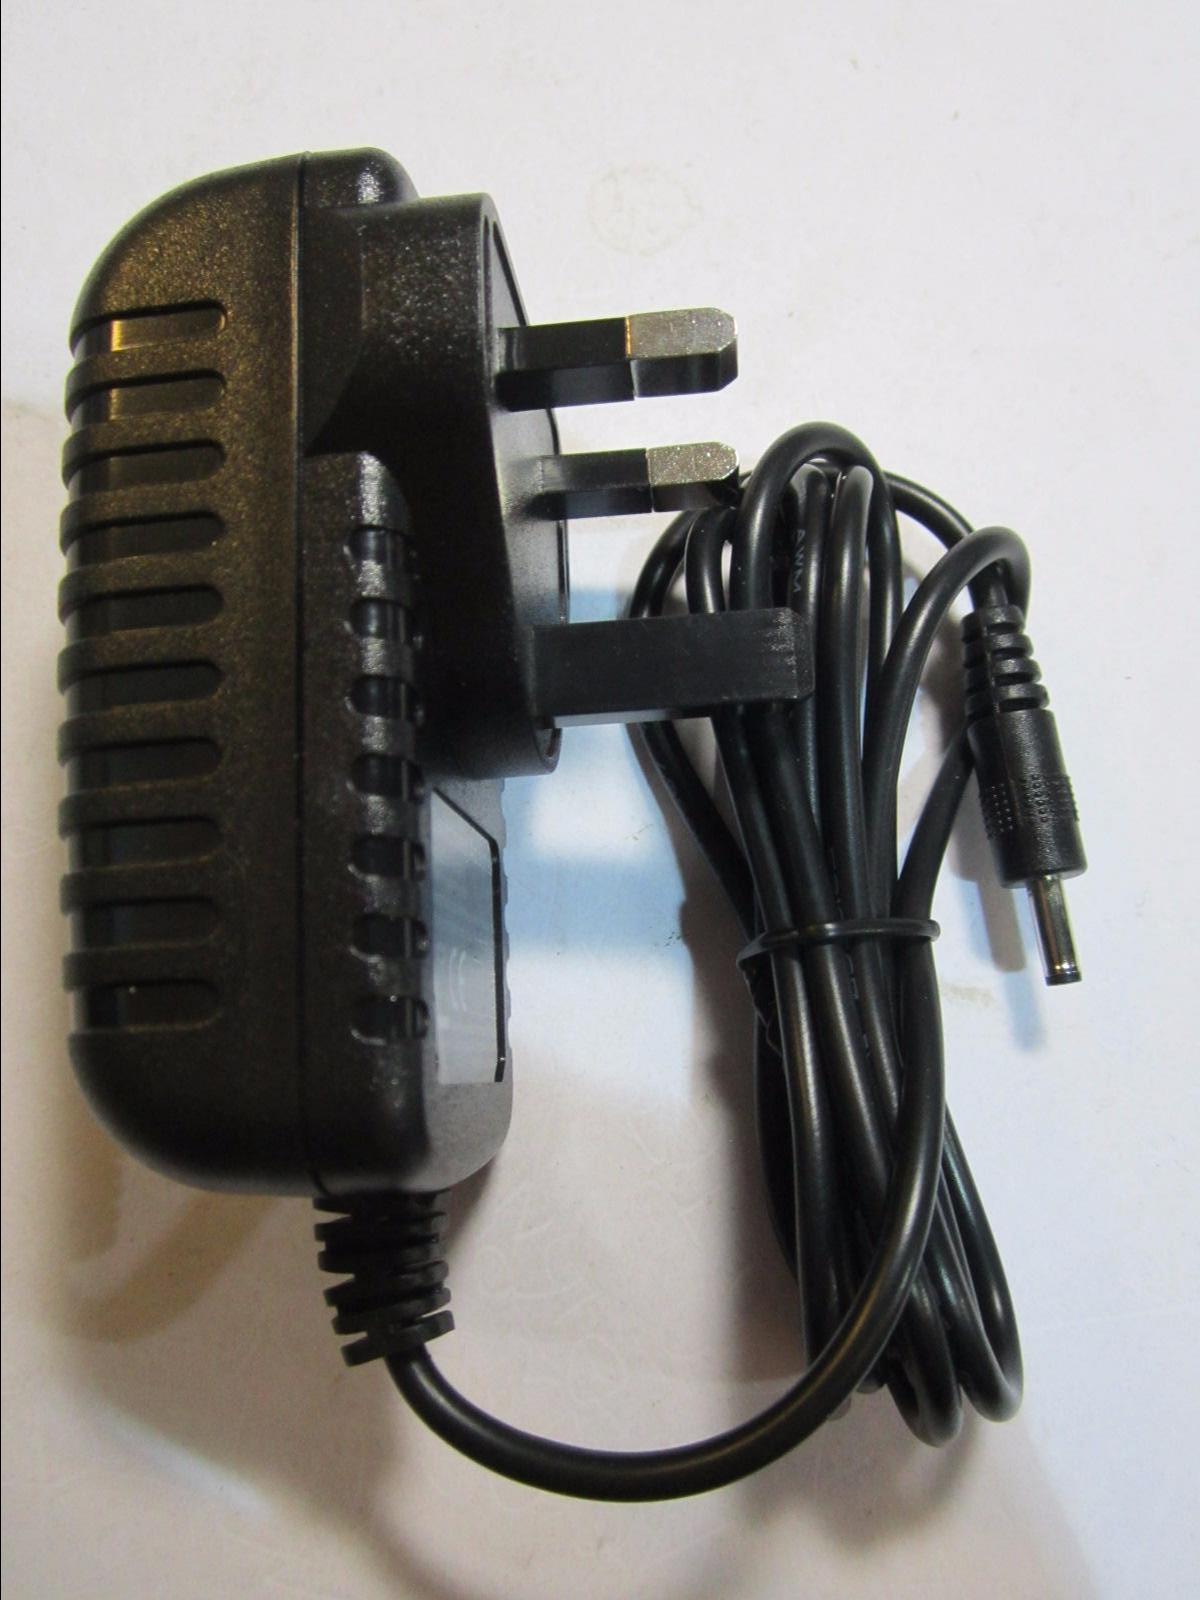 6V Mains AC Adaptor Charger for Gear 4 PG-447 Street Party 4 Iphone/Ipod Dock